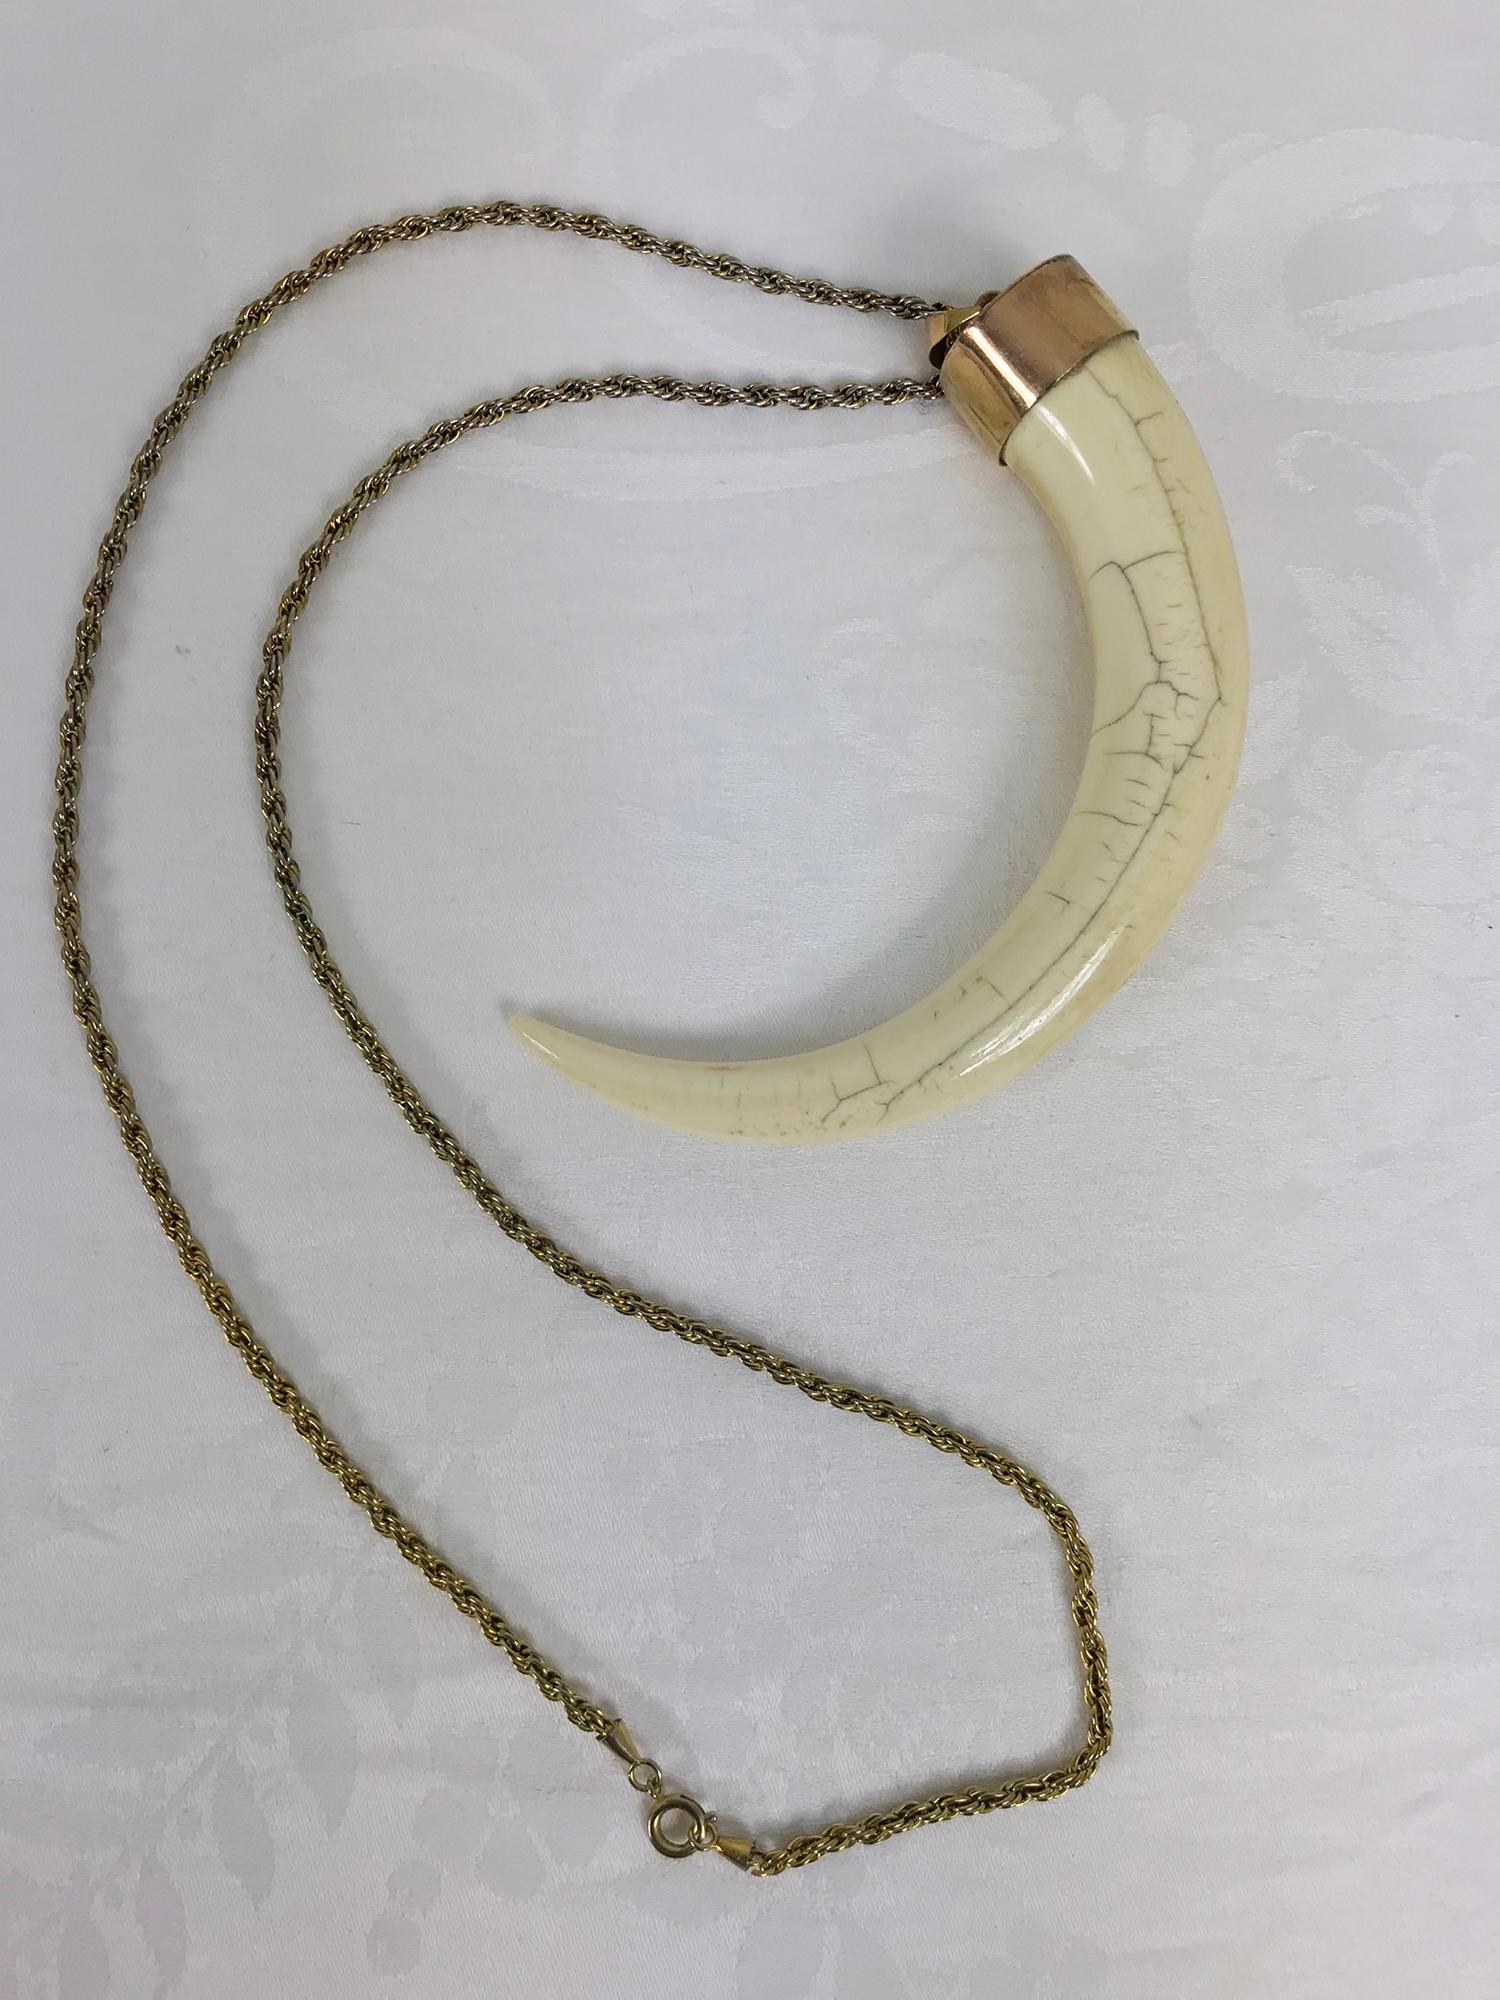 Wild boars tusk 14K gold mounted with chain from the 1950s. This beautiful piece is mounted in 14K gold, the tusk has a rich patina. With the original chain. 
Measurements are in inches:
4 1/2 measured on the side top edge to end
3 1/8 measured